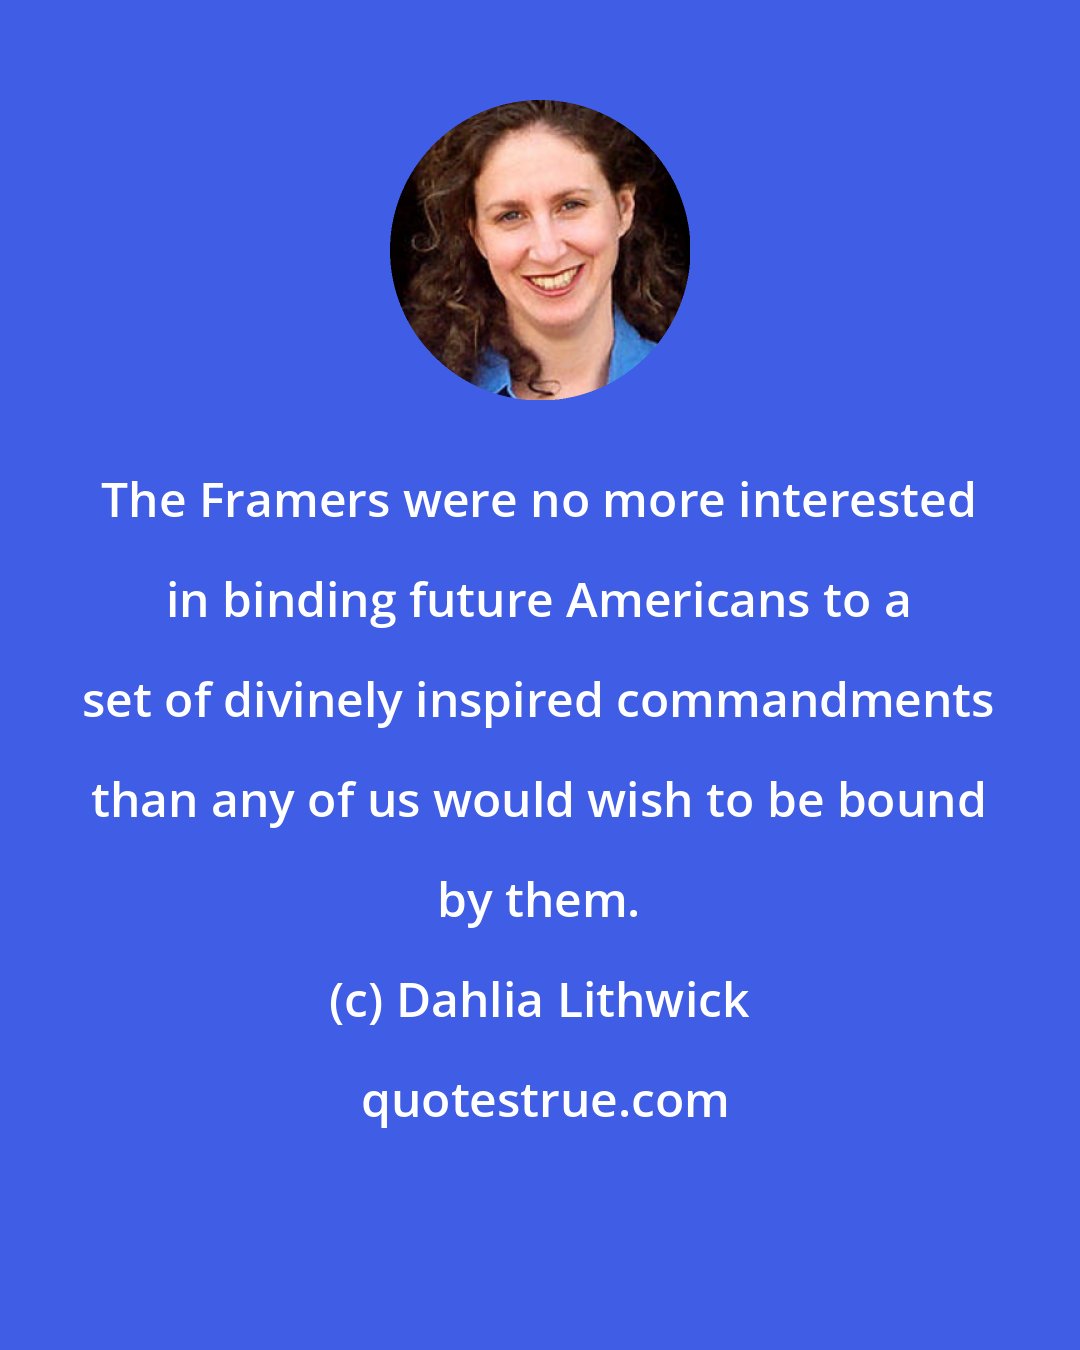 Dahlia Lithwick: The Framers were no more interested in binding future Americans to a set of divinely inspired commandments than any of us would wish to be bound by them.